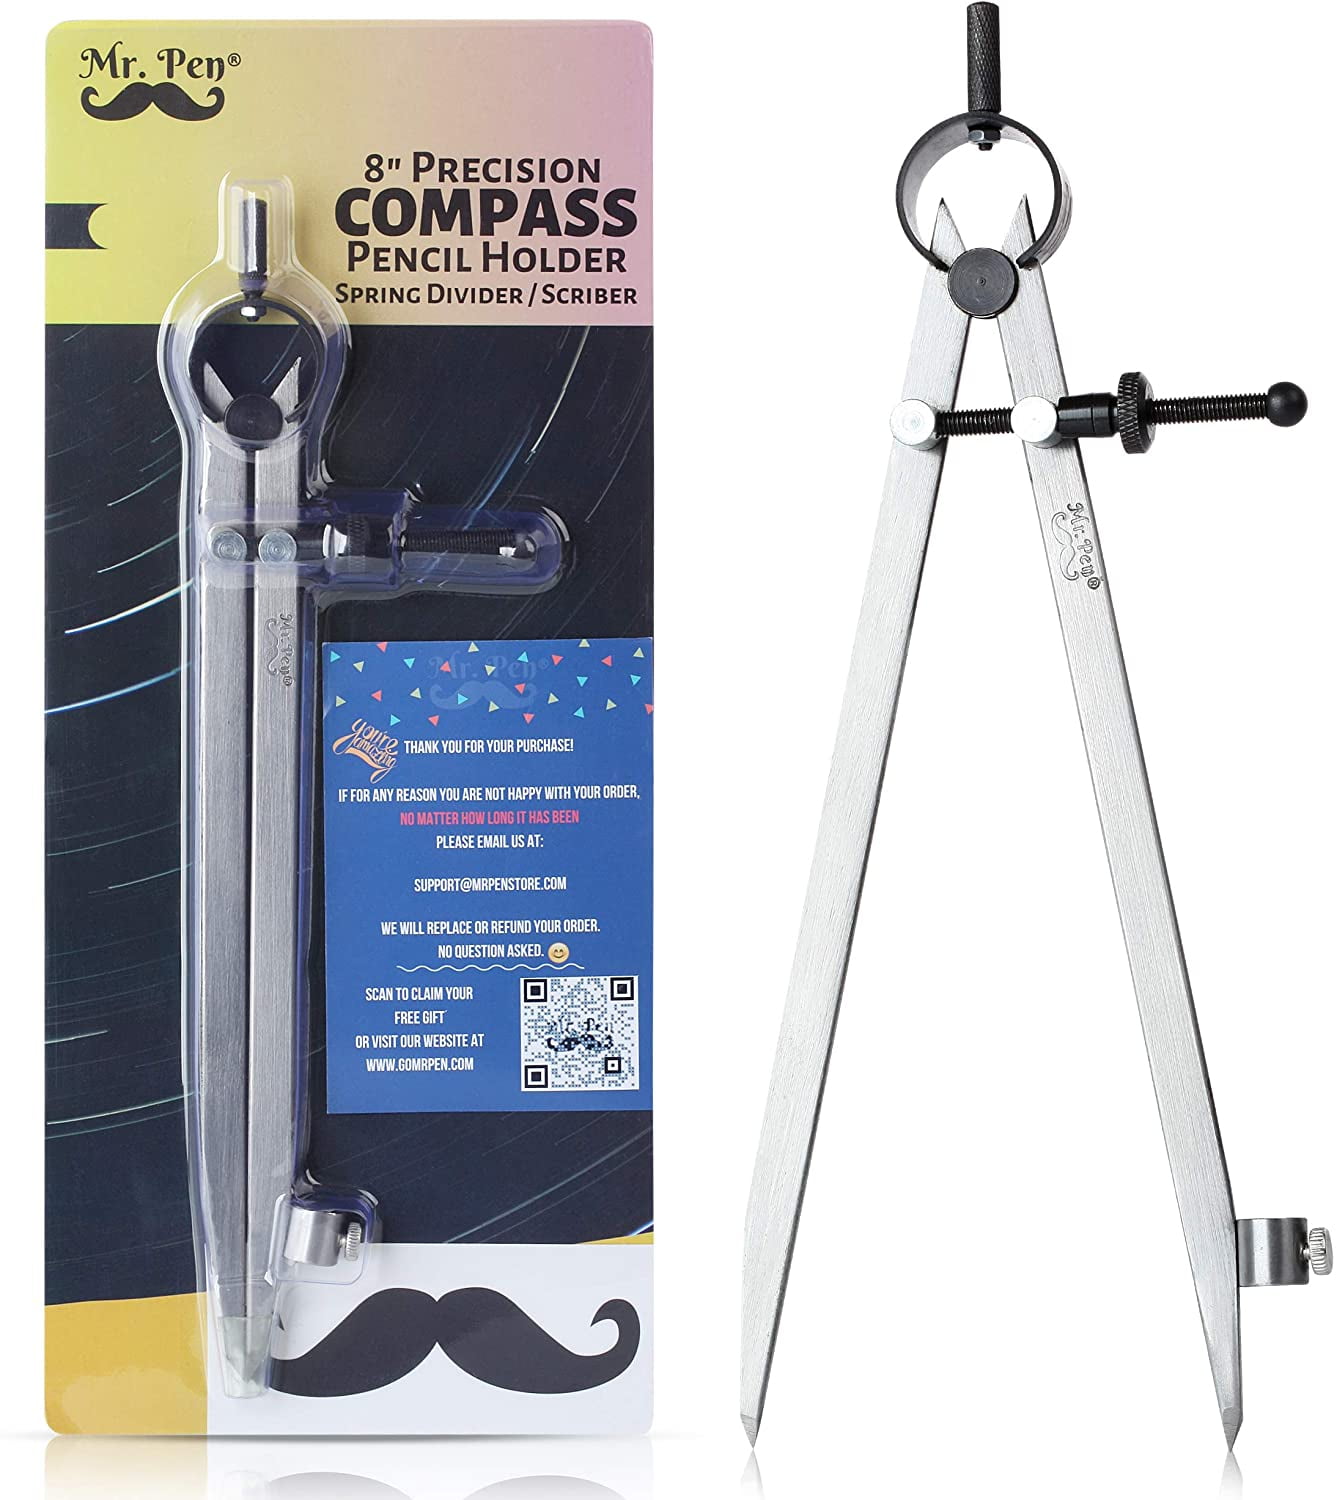 Professional Compass for Geometry Precision Compass with Pencil Holder for Math 